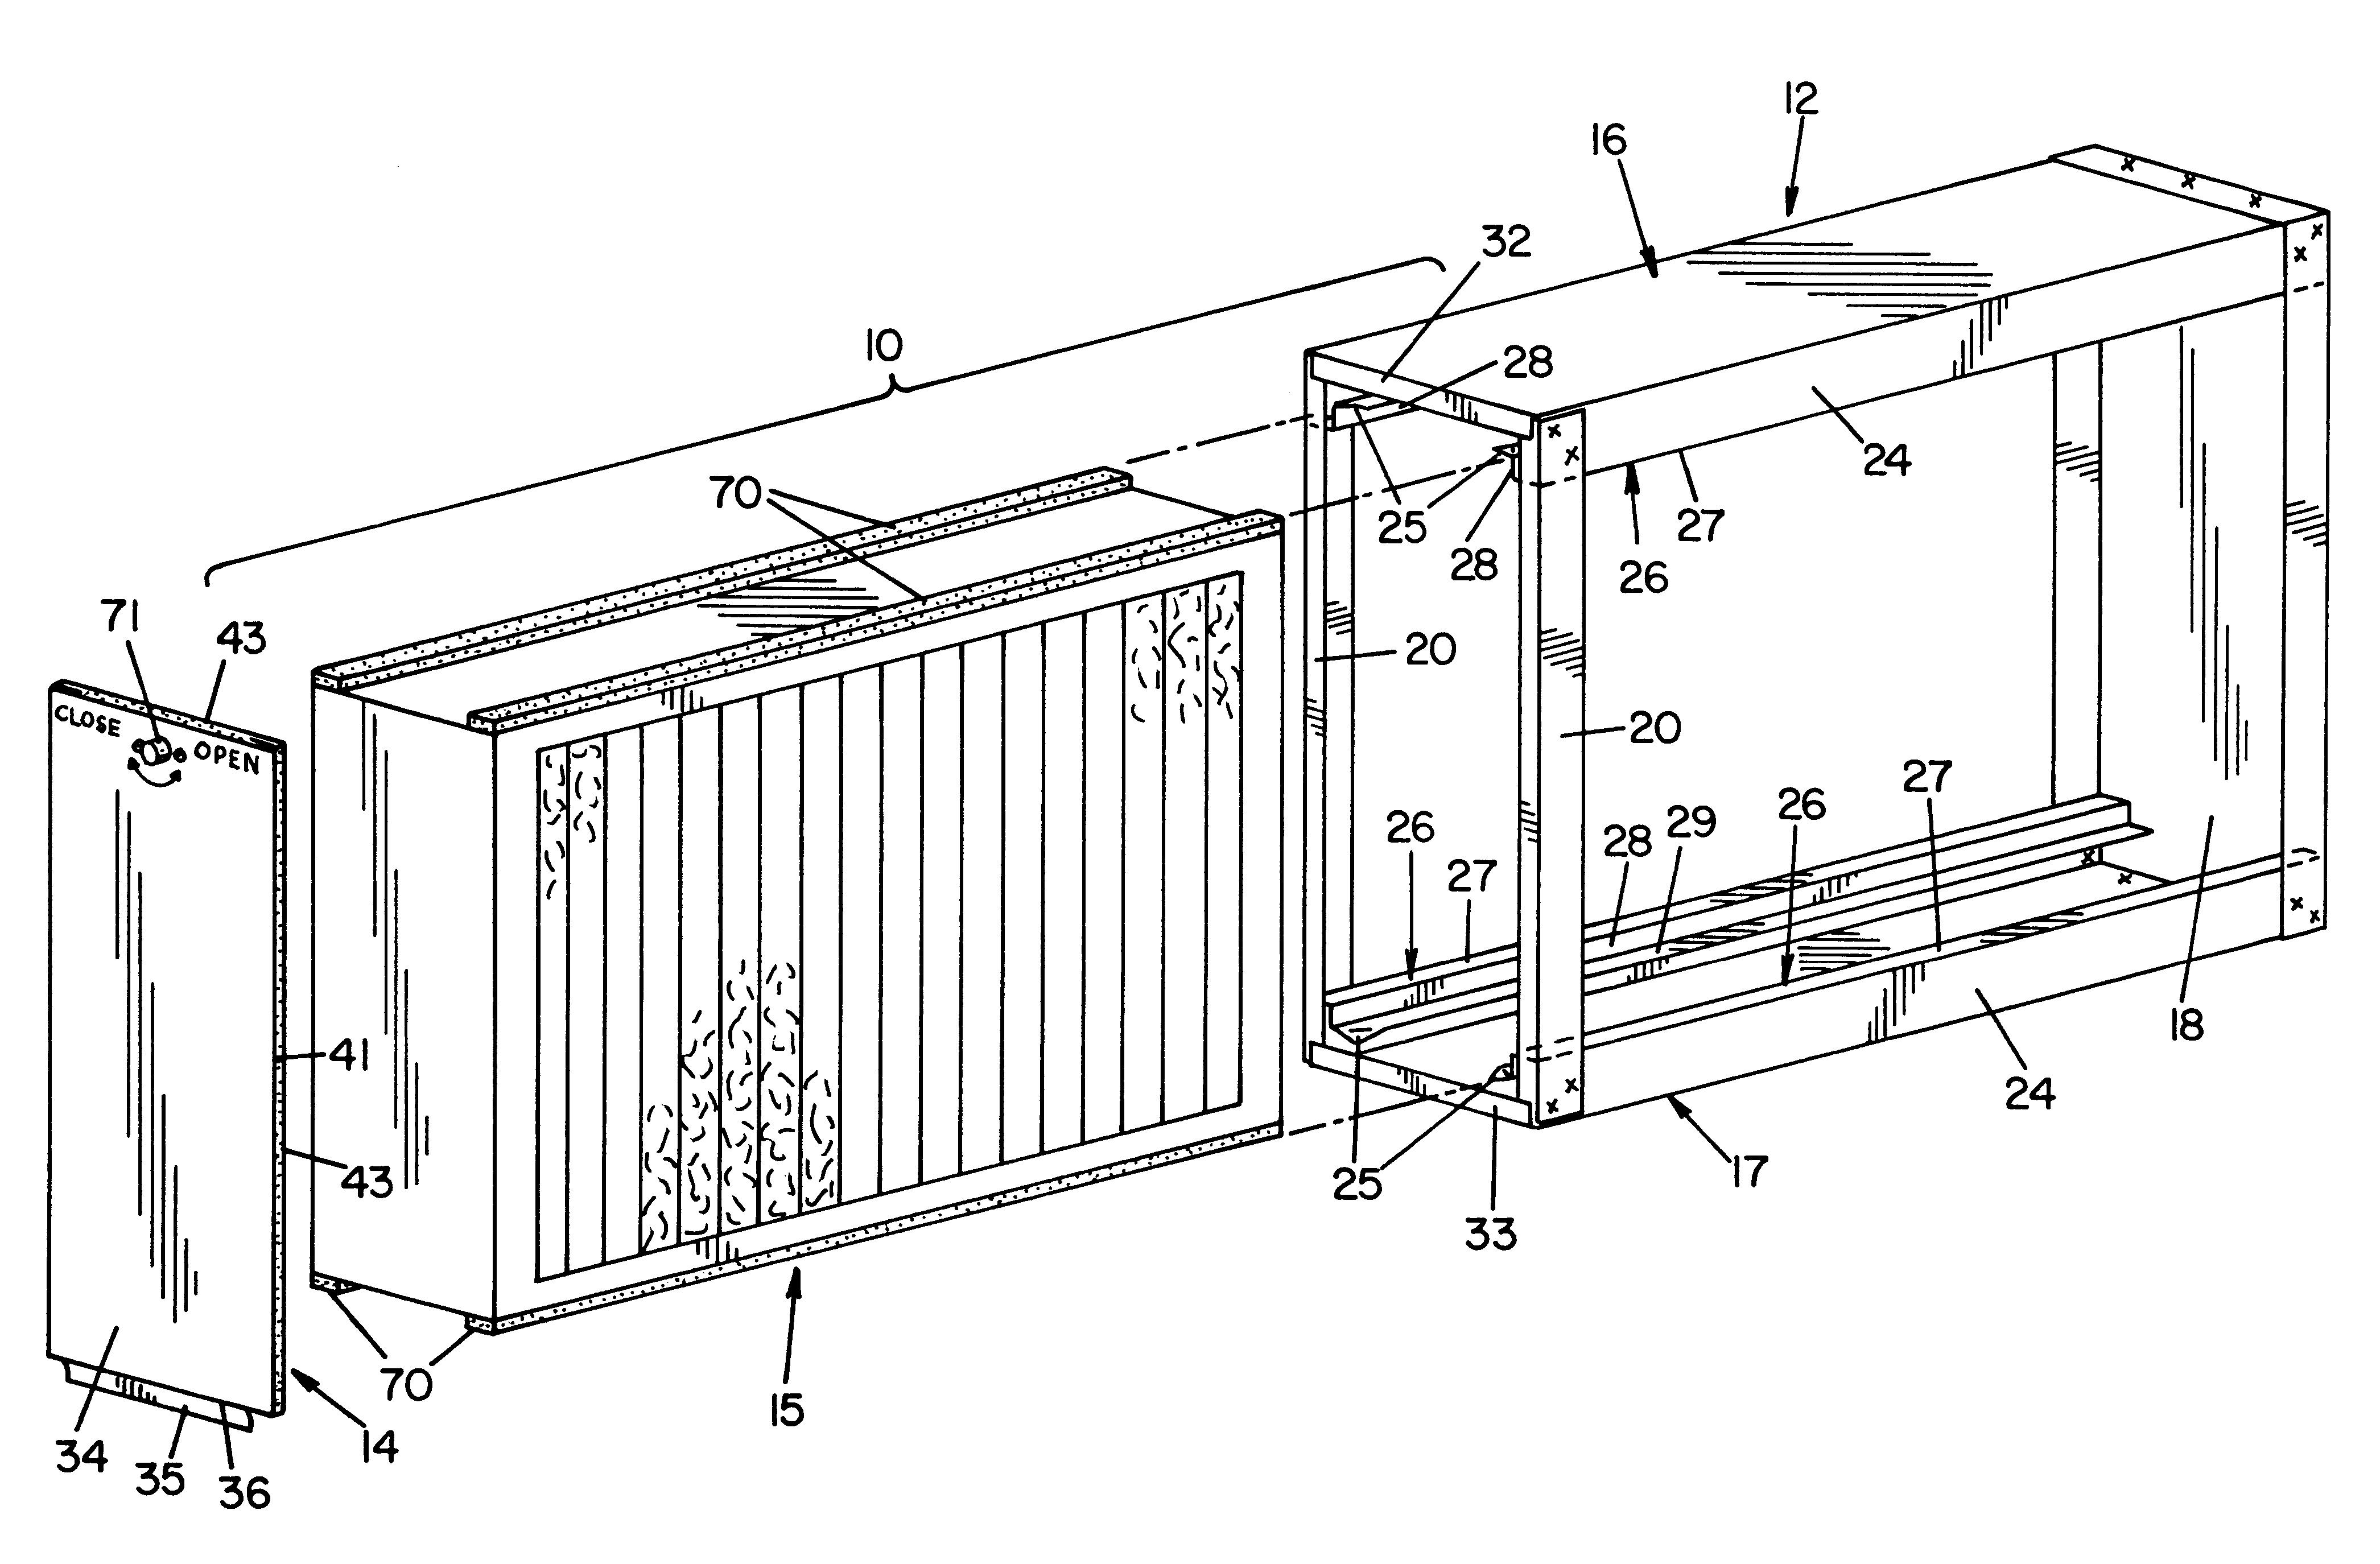 Media filter assembly having replaceable filter element